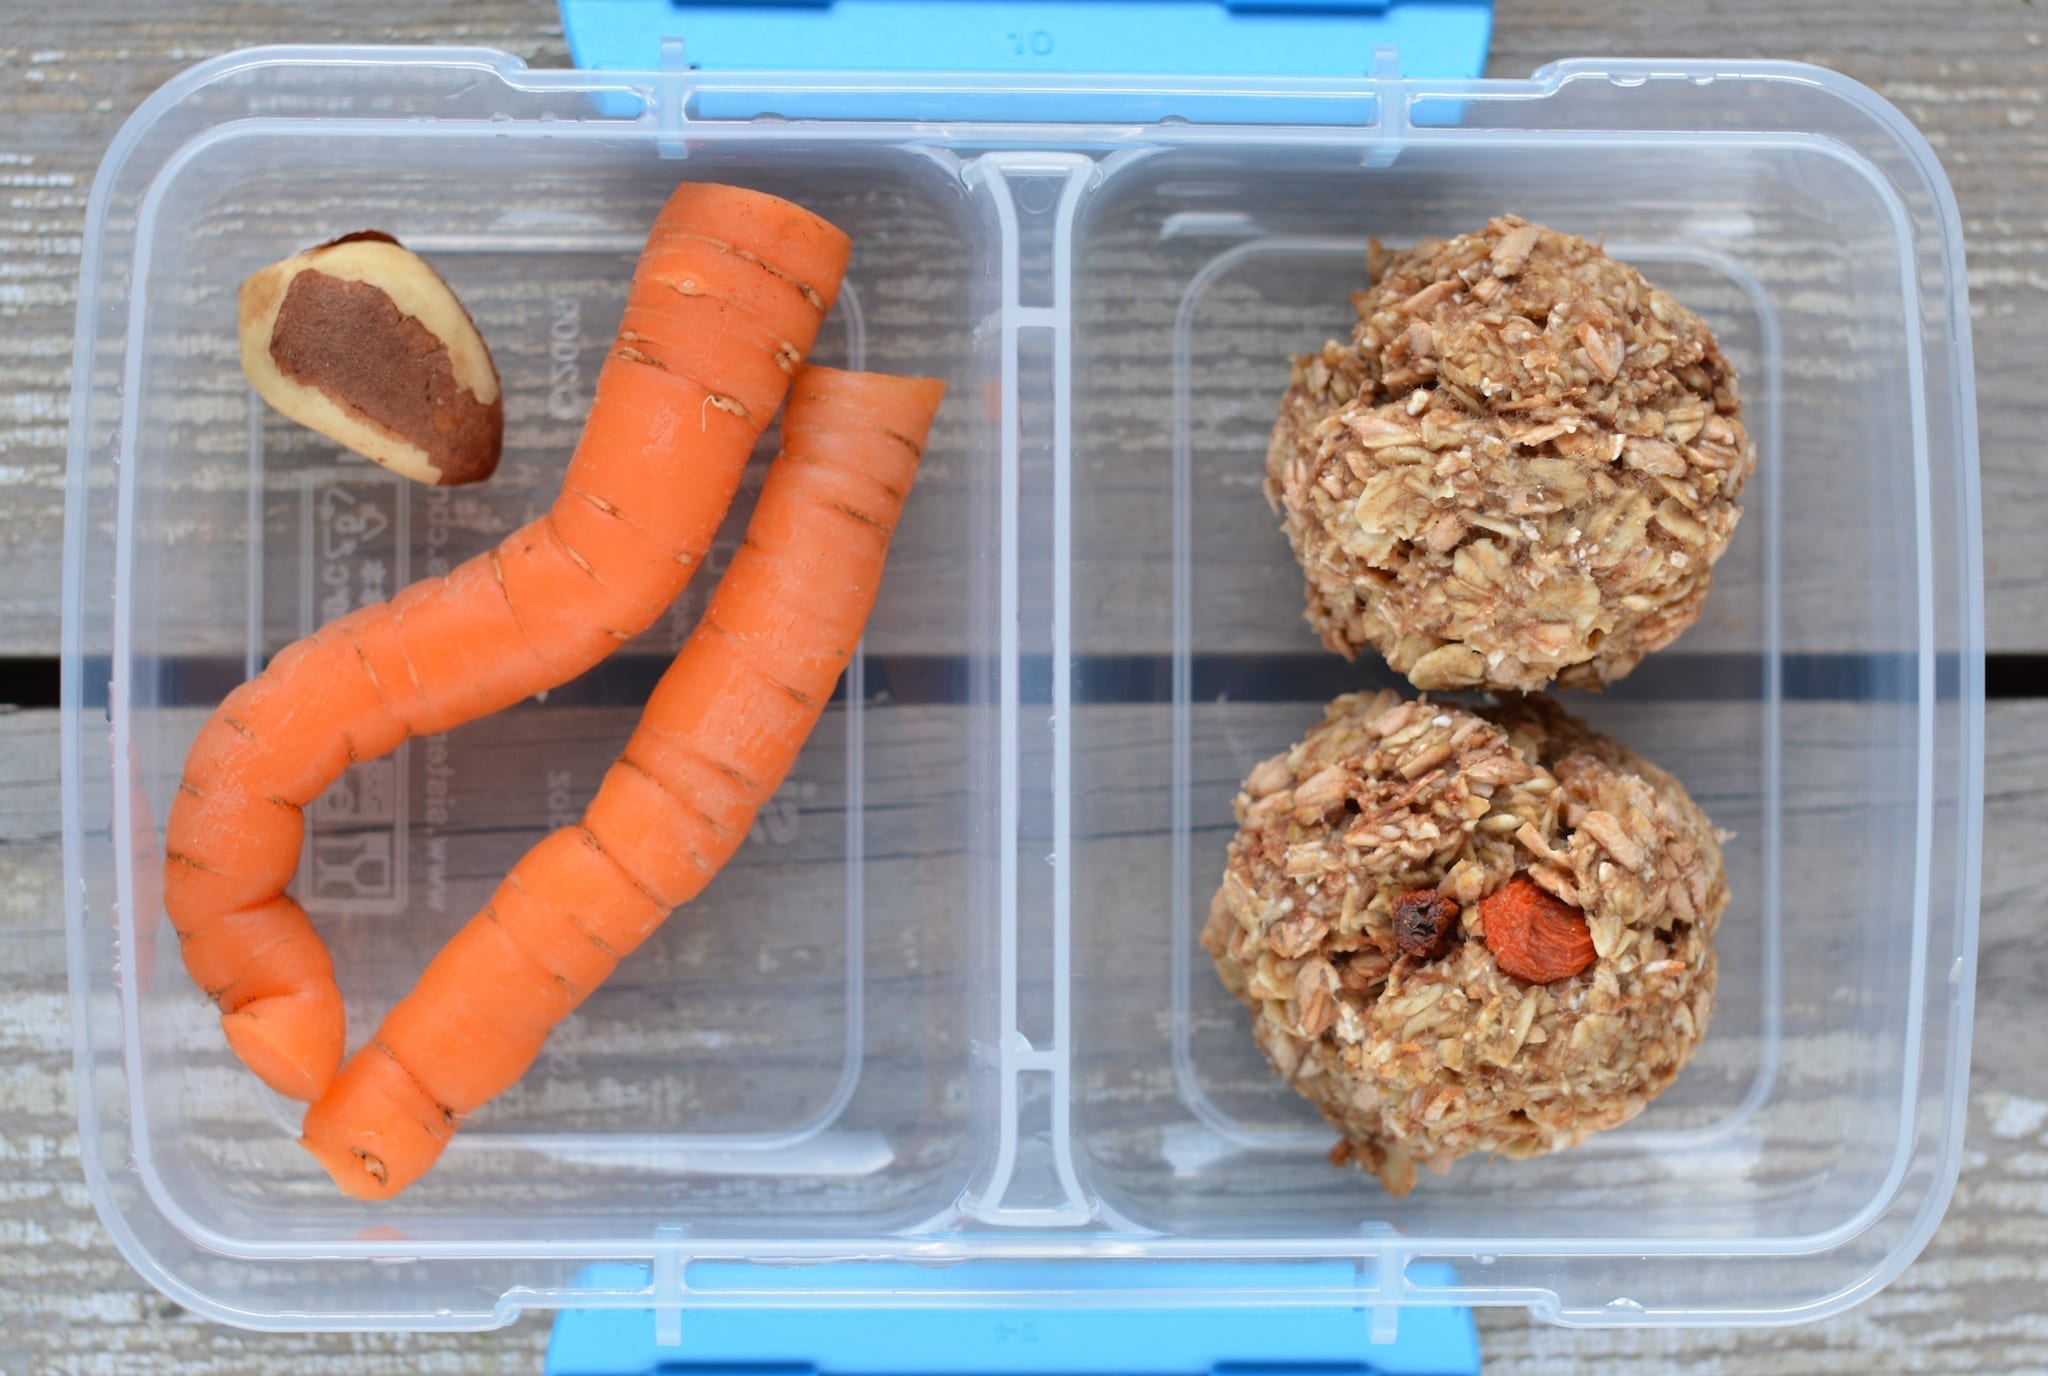 Snack box with carrots, cookies and a nut